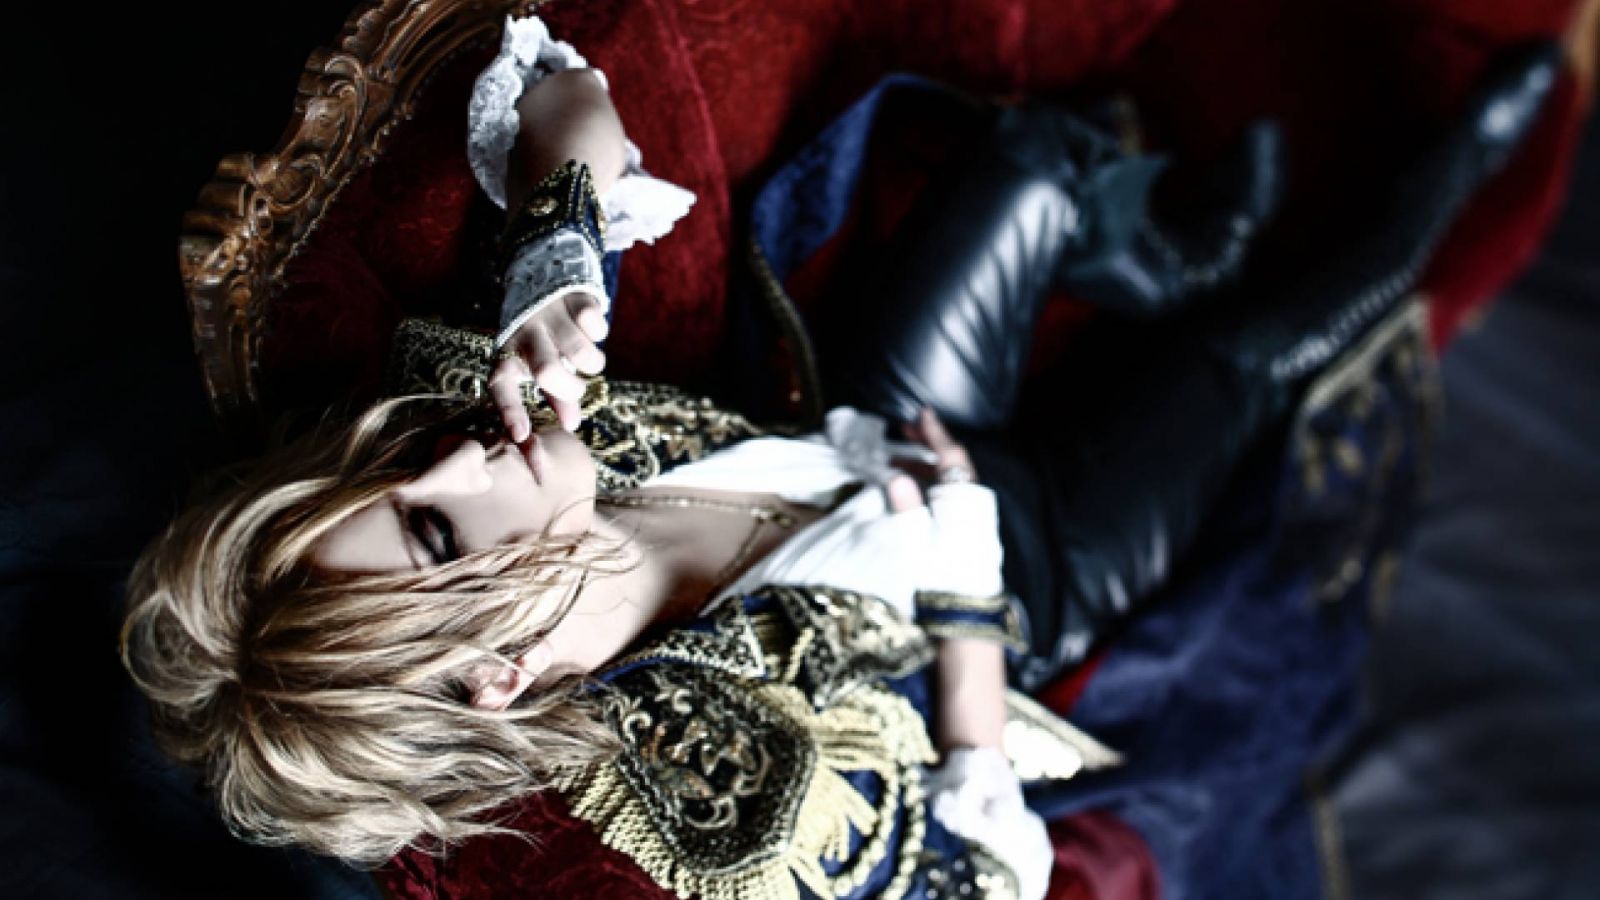 Entrevista con KAMIJO © CHATEAU AGENCY CO., Ltd. All rights reserved.